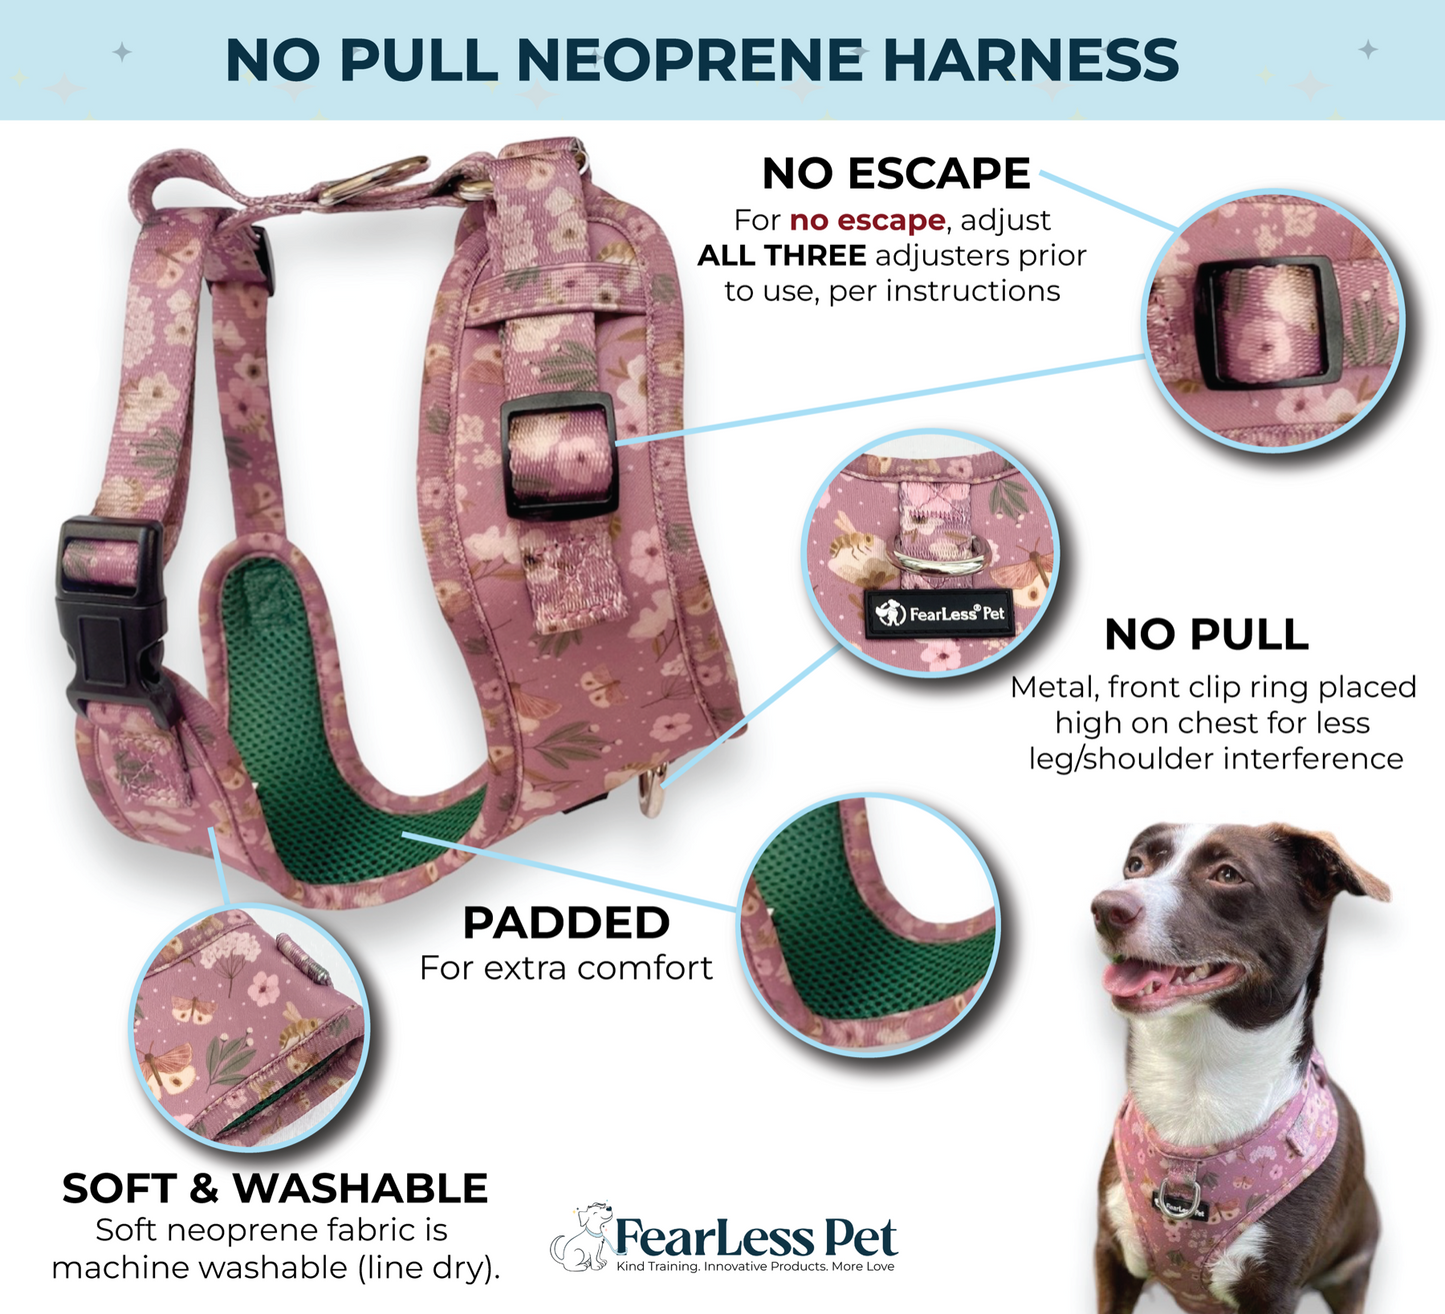 an infographic of a pink dog harness with bees and highlights its features as a no escape small dog harness with a front clip